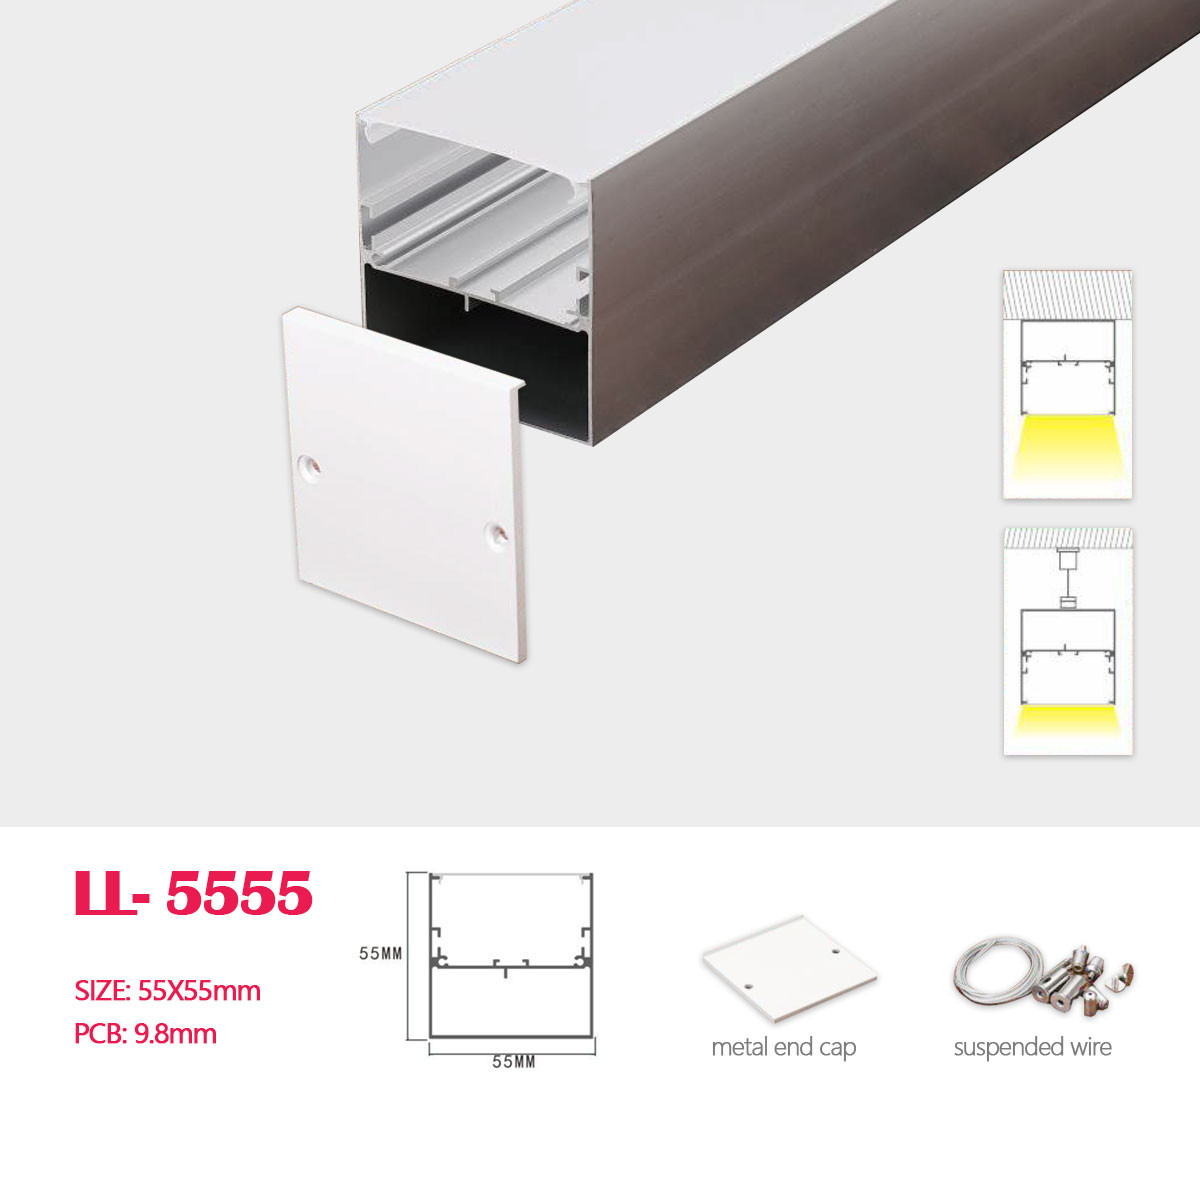 1M (3.28FT) 55MM*55MM Square Double-layer Aluminum Profile with Flat cover,Suspension wire for Pendant or Surface Mounting LED Linear  Lighing